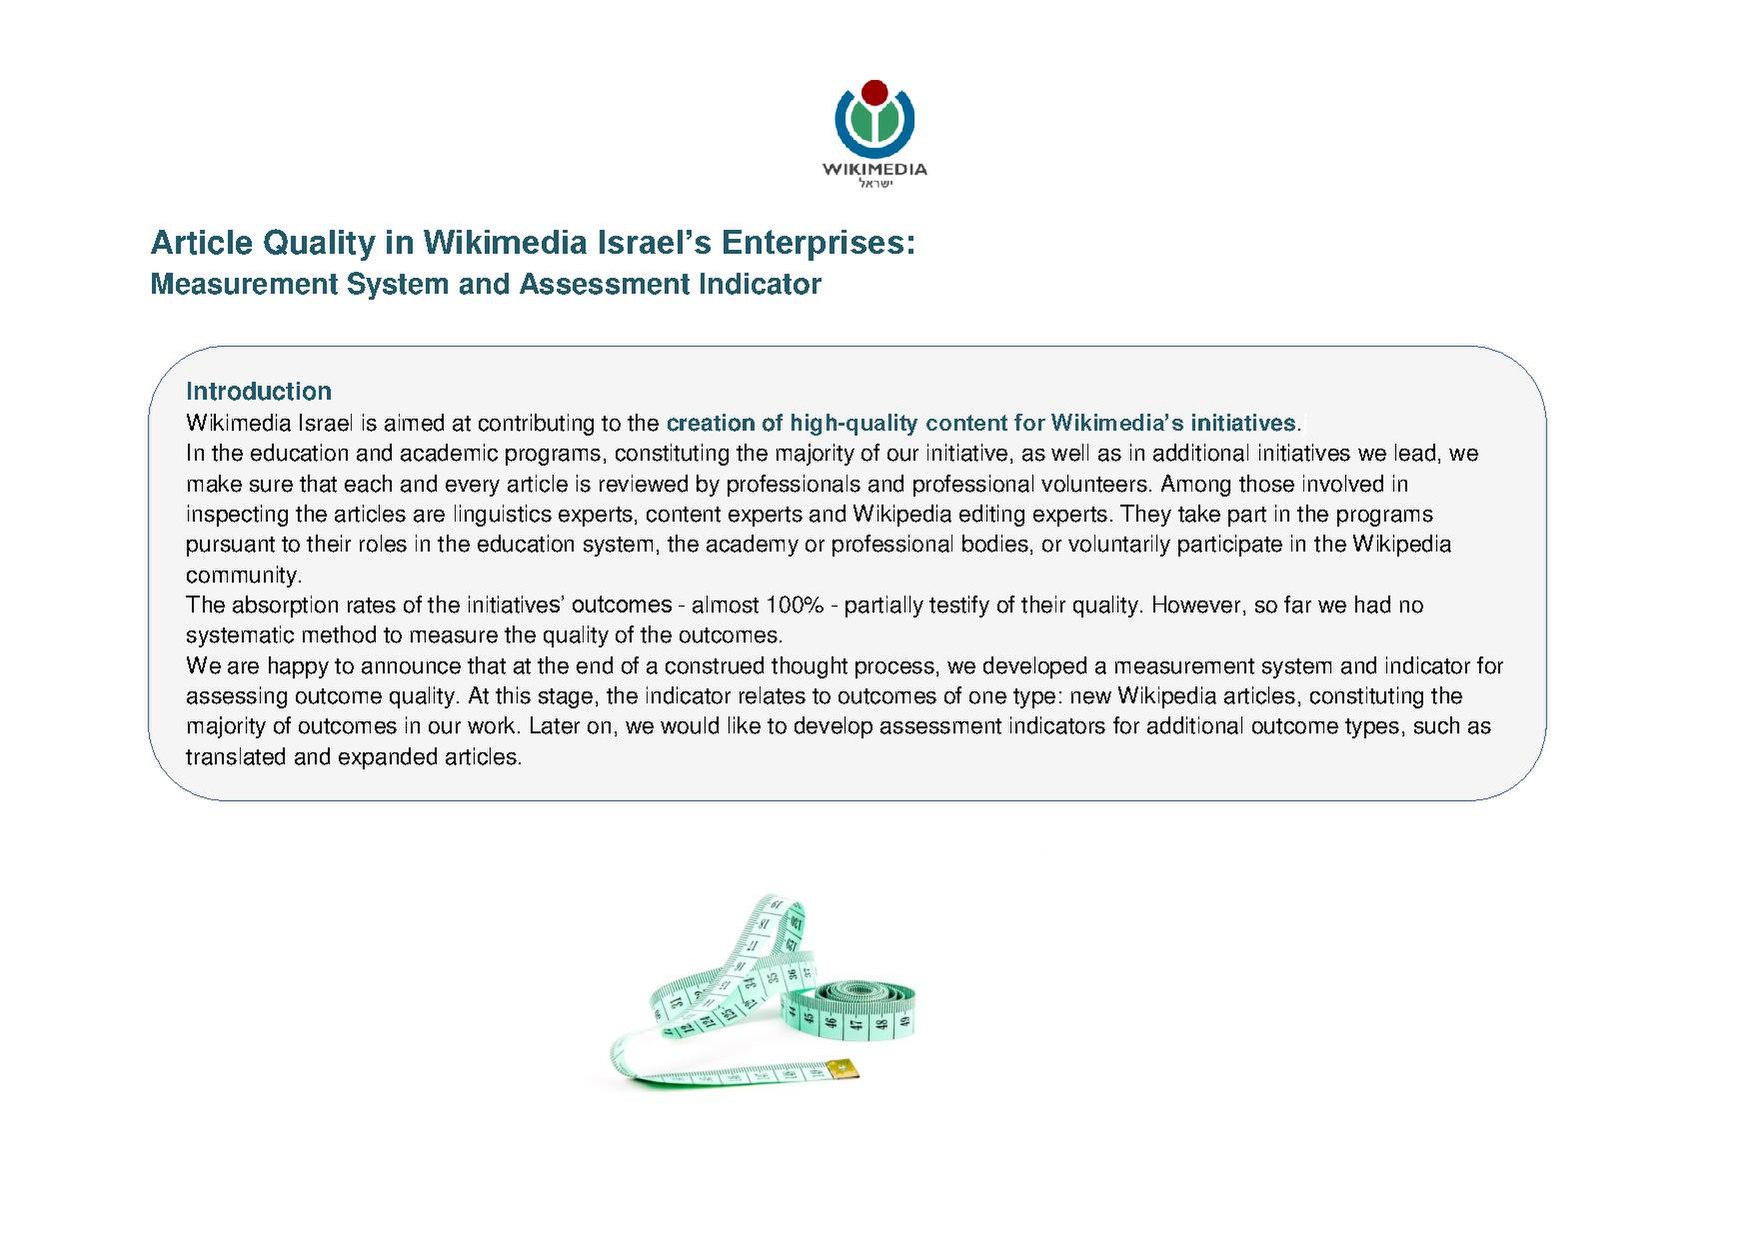 File:Article Quality in WMIL Enterprises Measurement System and Assessment Indicator.pdf